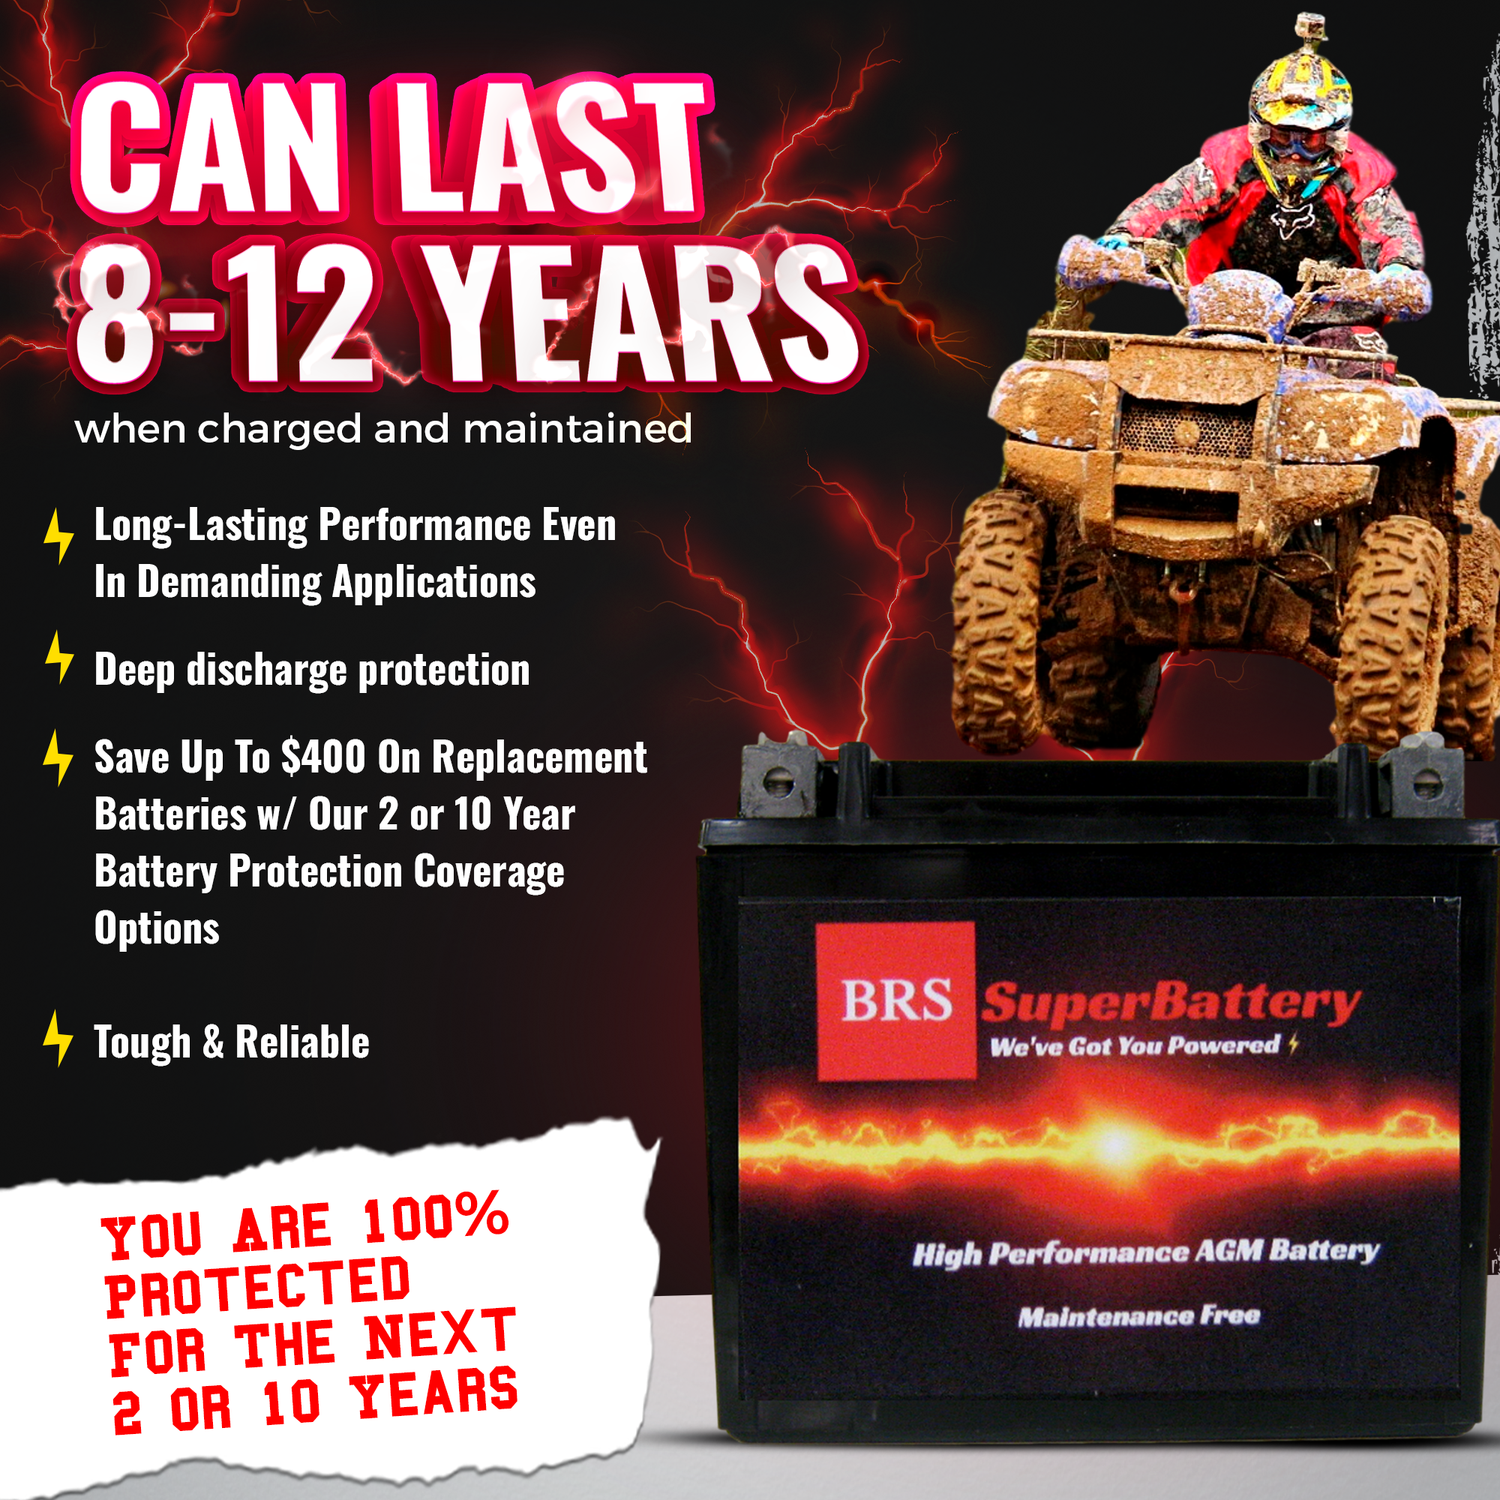 BRS9B-BS 30 Day Warranty Battery & Smart Charger / Maintainer Combo Bundle Kit - BRS Super Battery